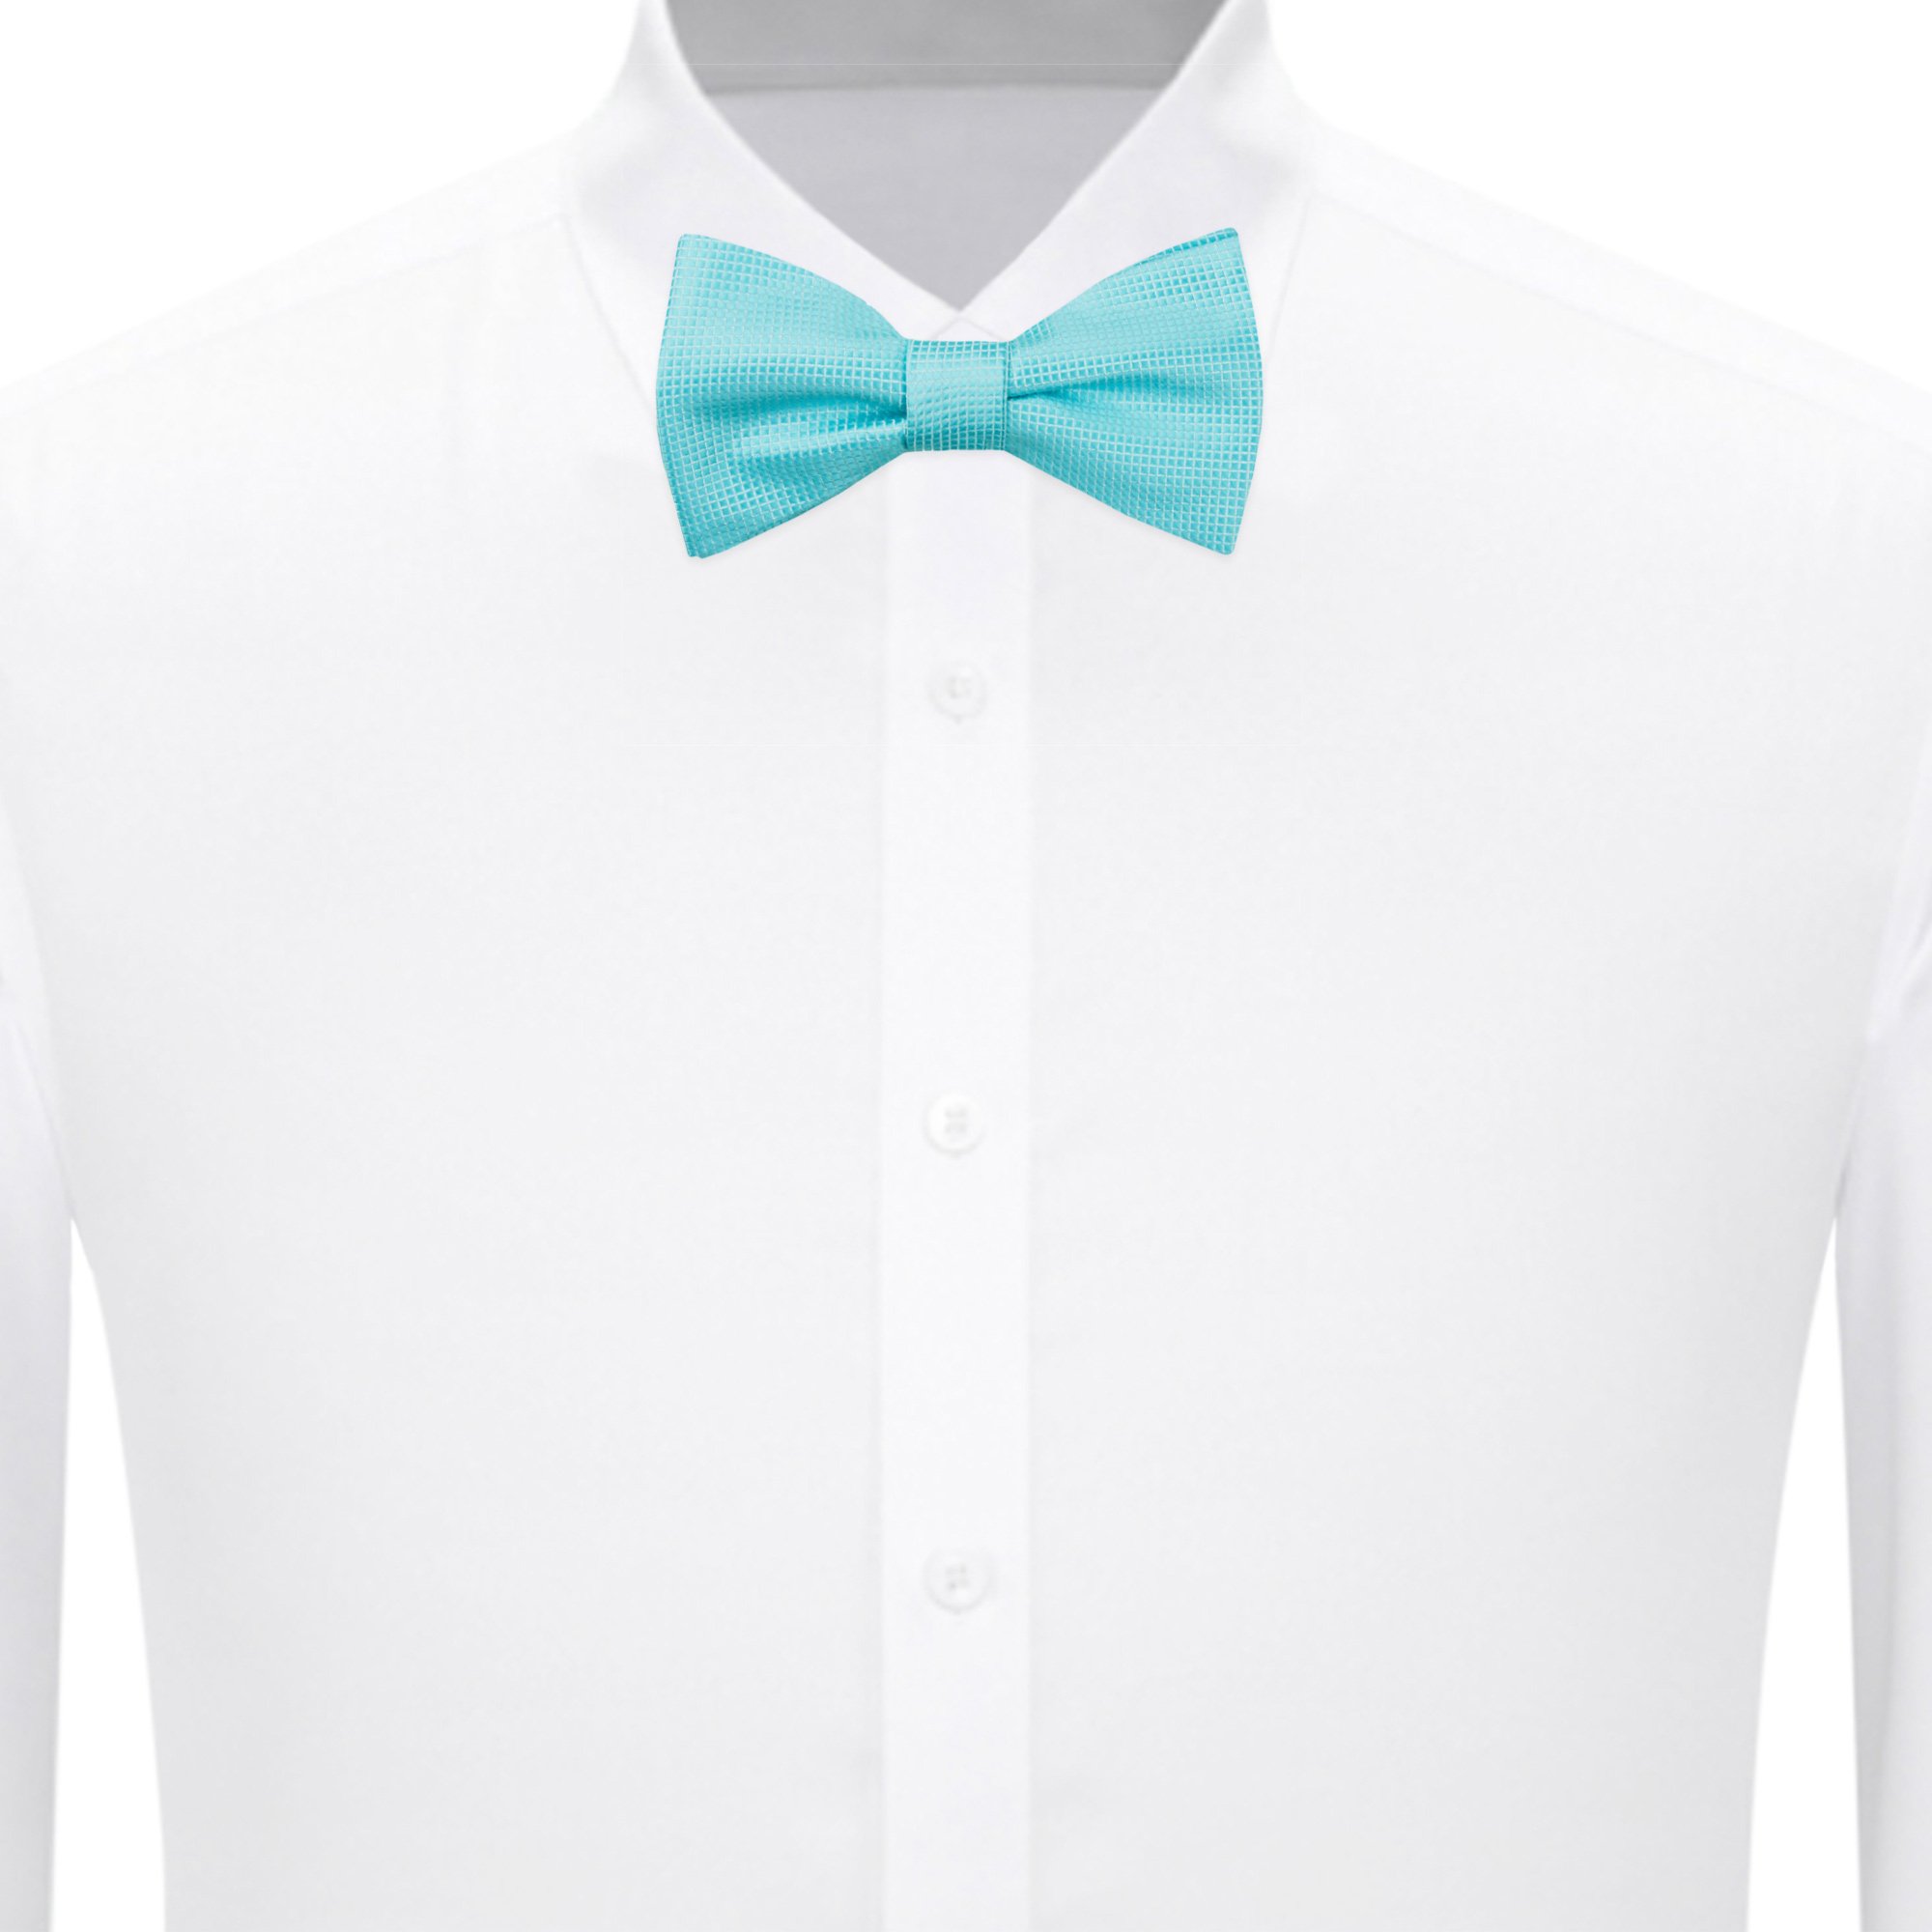 4 Piece Set: Jacob Alexander Men and Young Boys' Woven Subtle Mini Squares Self-Tie Bow Tie Adjustable Pre-Tied Banded Bow Tie and Pocket Squares - Light Turquoise - image 5 of 7